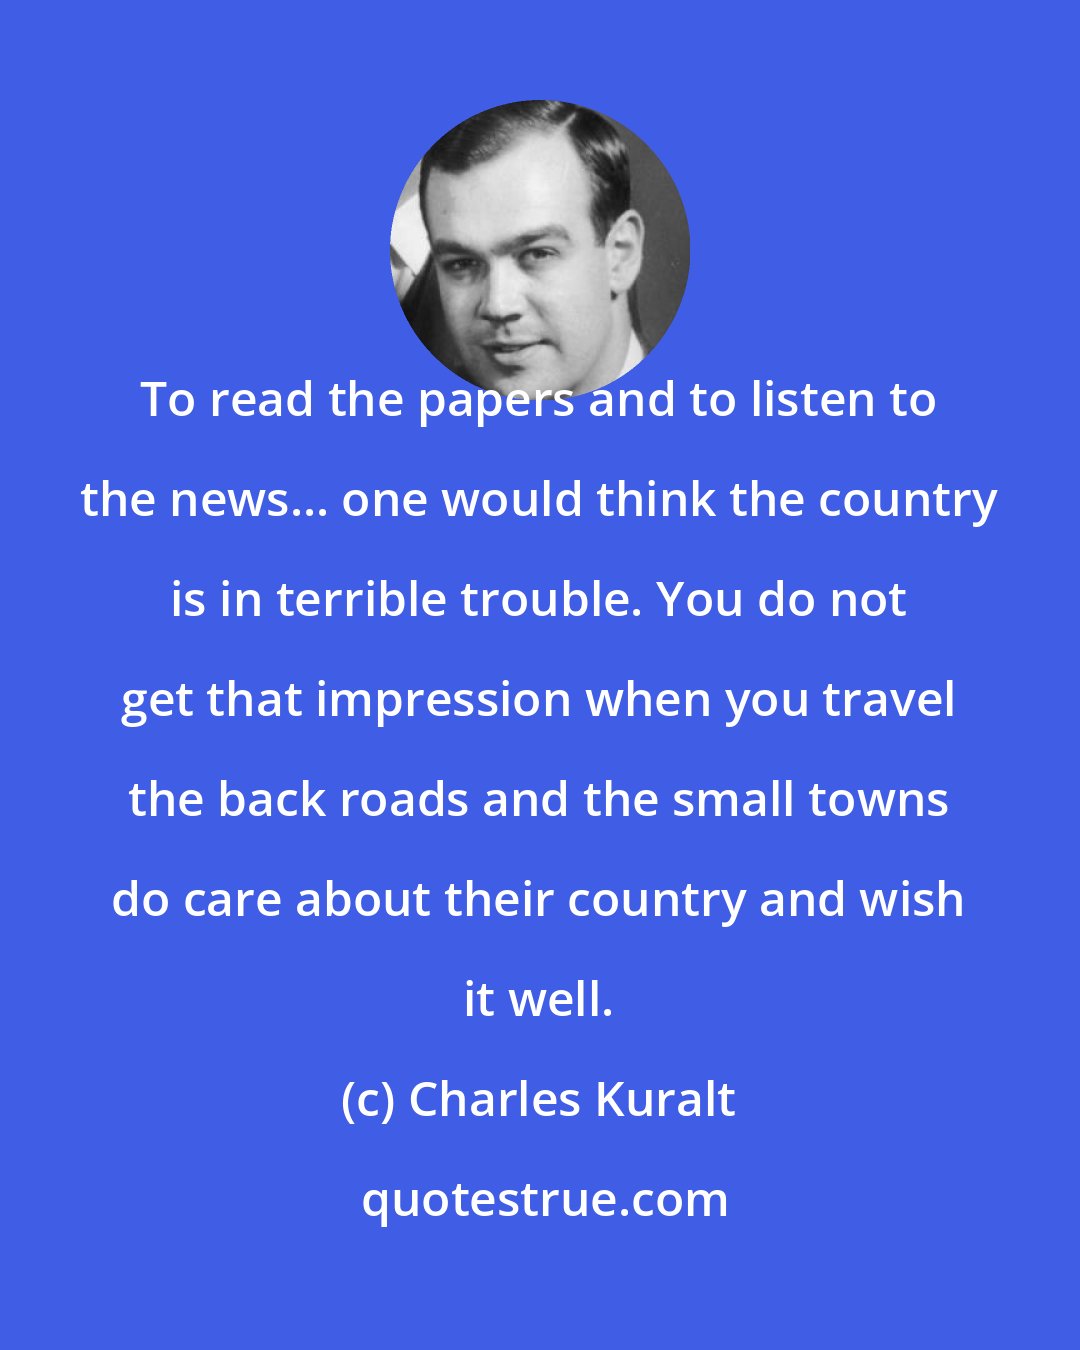 Charles Kuralt: To read the papers and to listen to the news... one would think the country is in terrible trouble. You do not get that impression when you travel the back roads and the small towns do care about their country and wish it well.